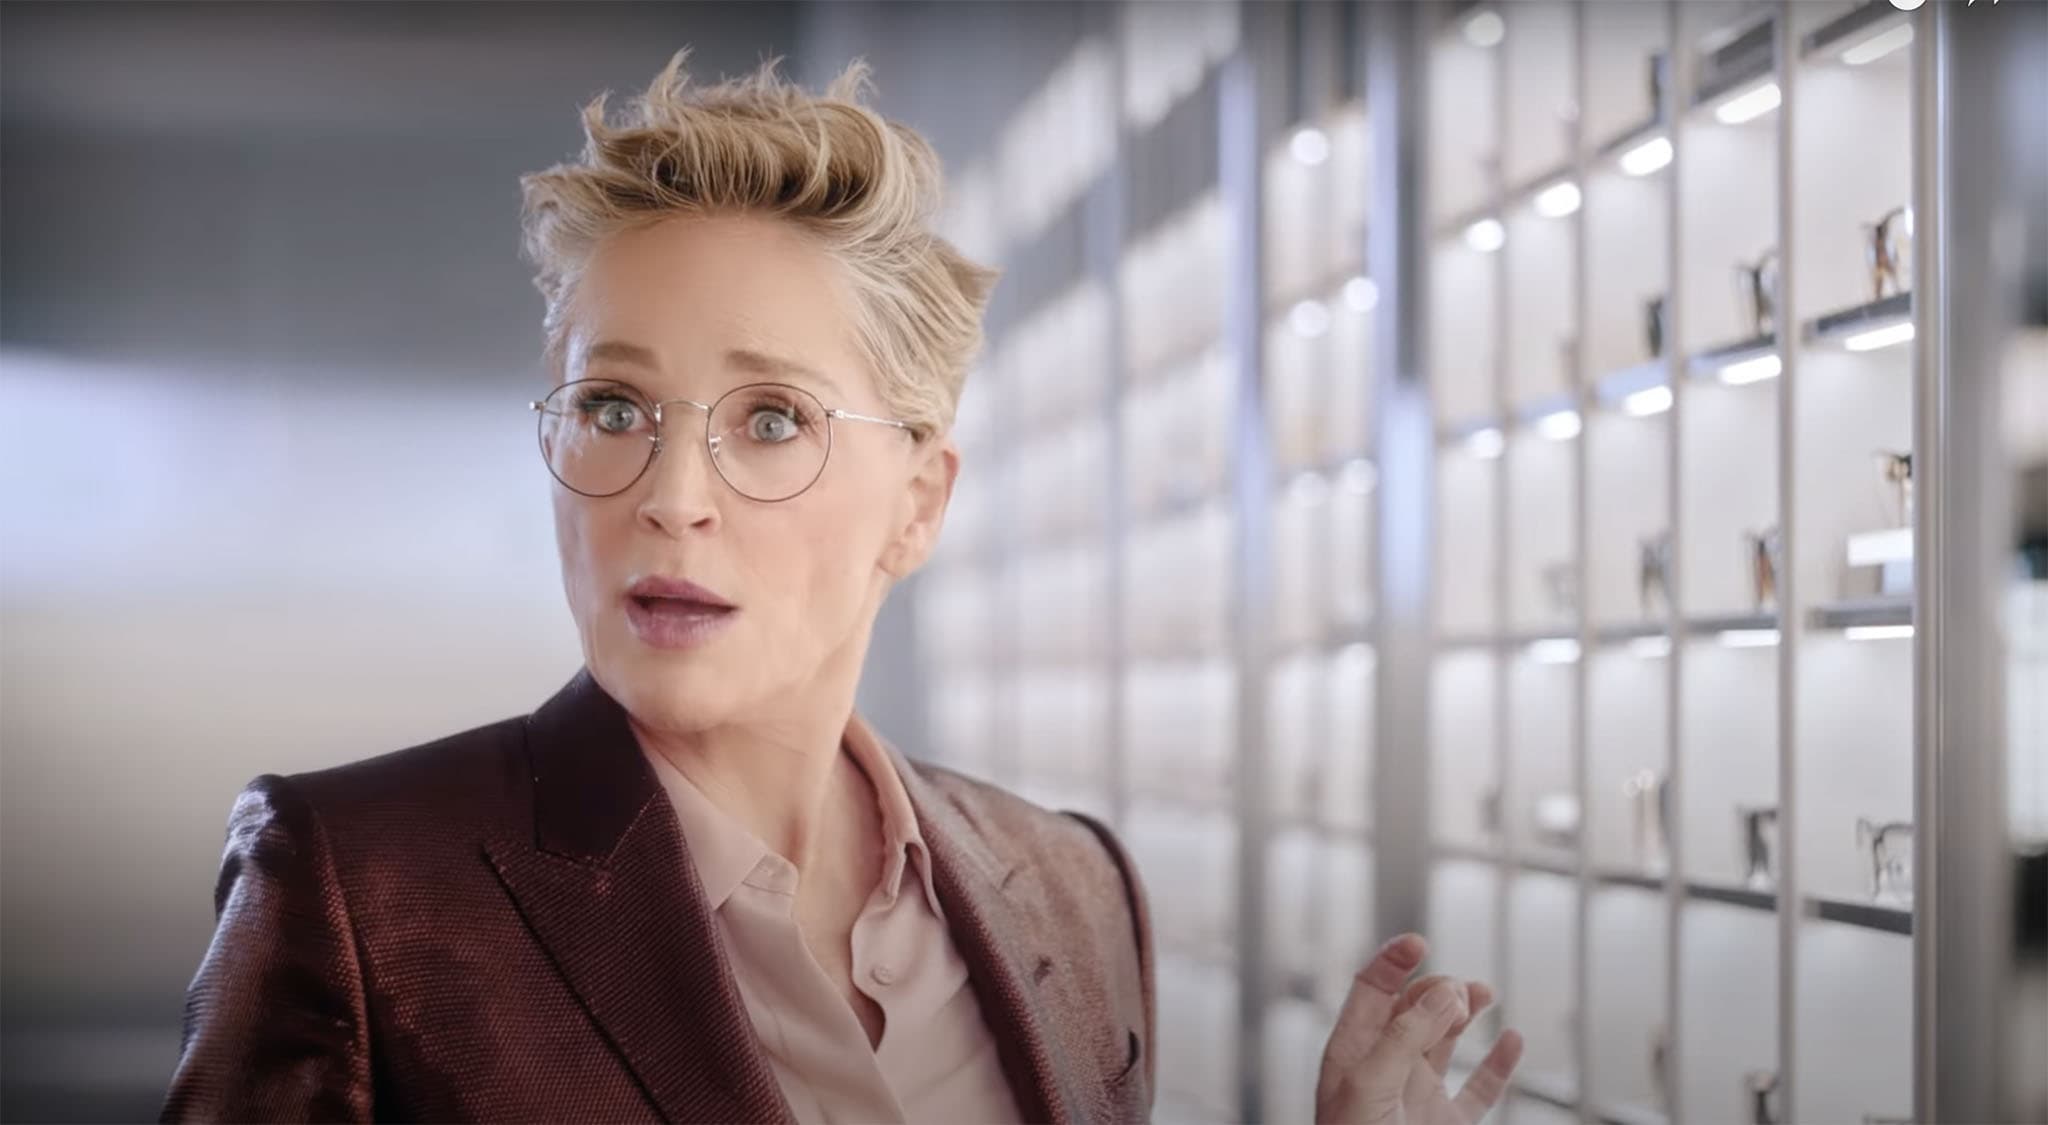 Sharon Stone stars in LensCrafters' 2022 Your Eyes First campaign